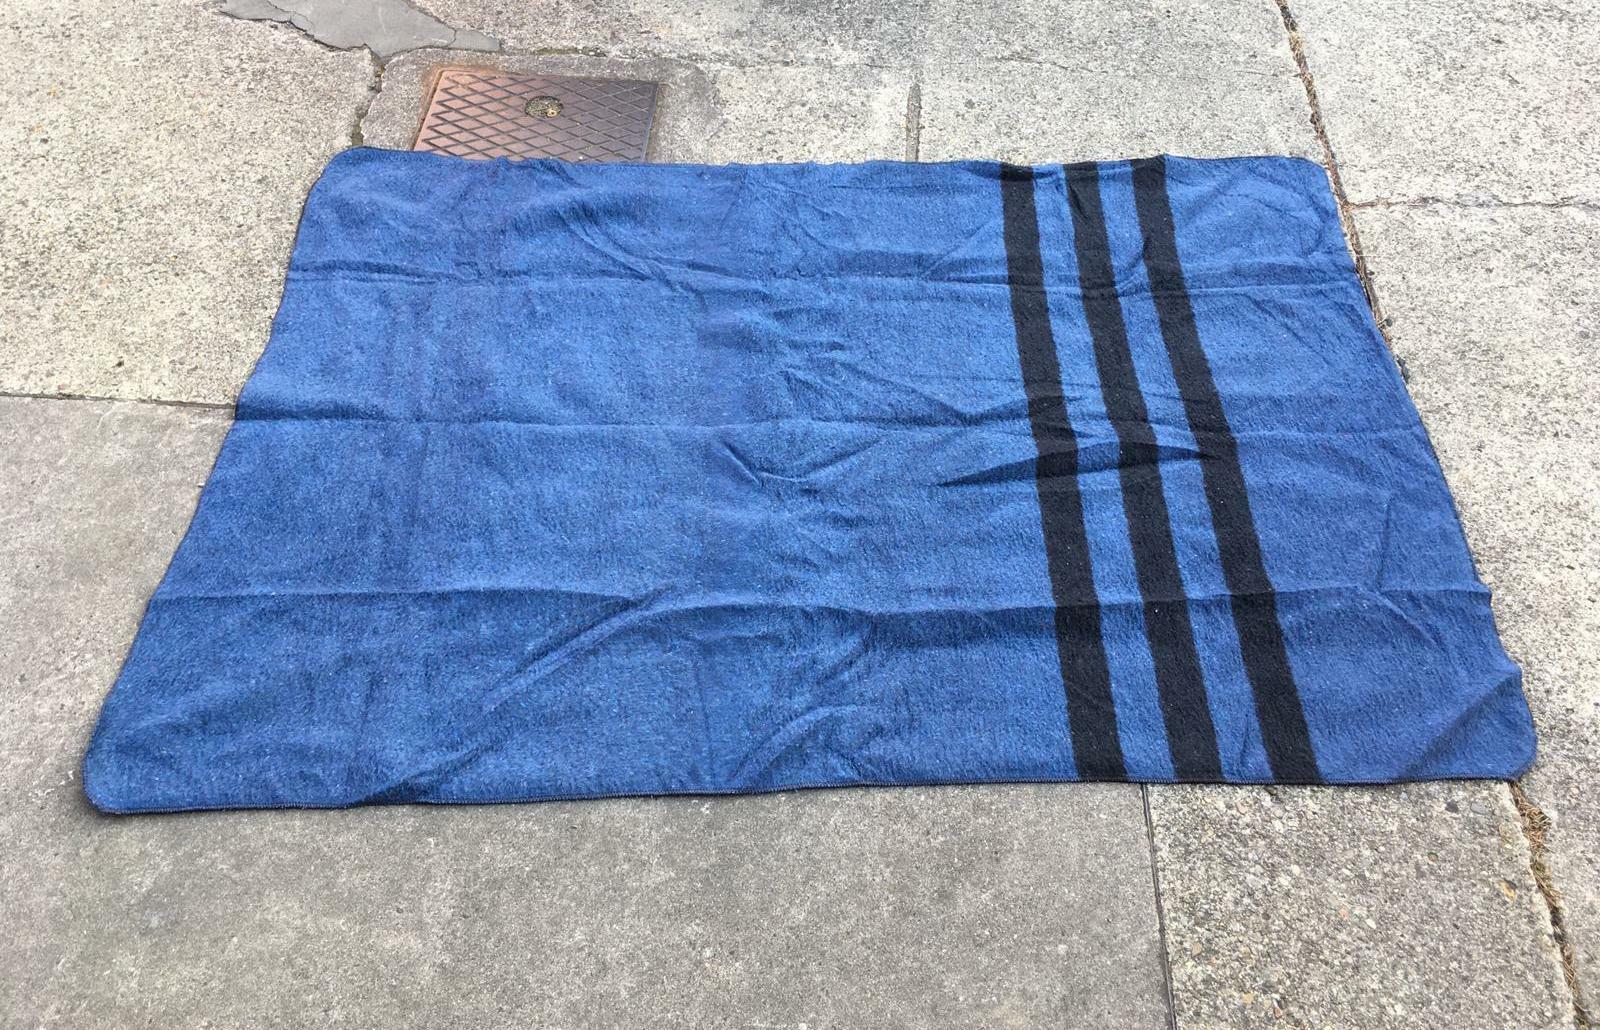 Russian Army Navy Blue Blanket Large Thick Warm Bivouac Camping Military Surplus